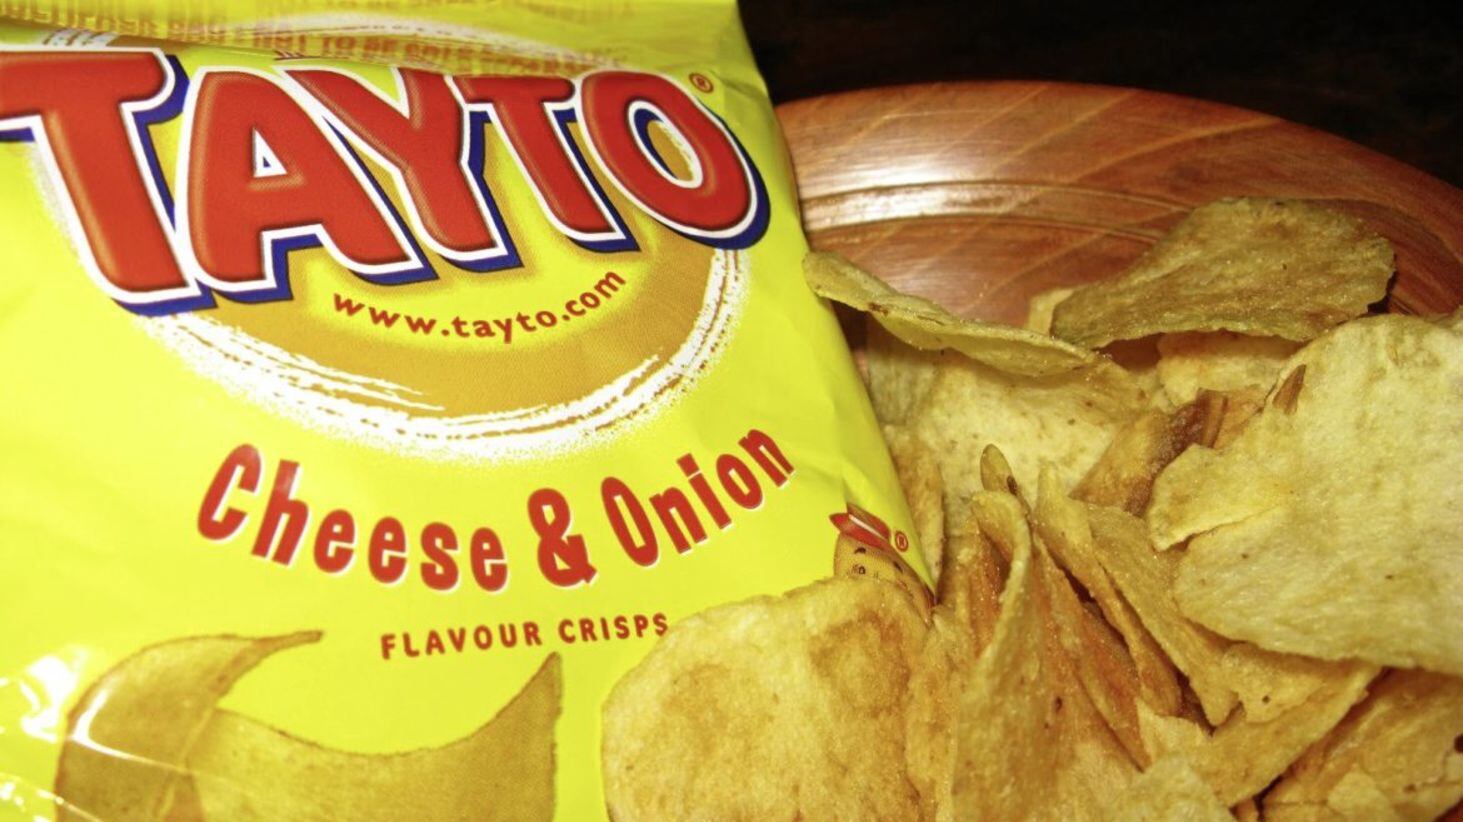 Tayto's parent owner Manderley Food posted losses of more than £600,000 last year.